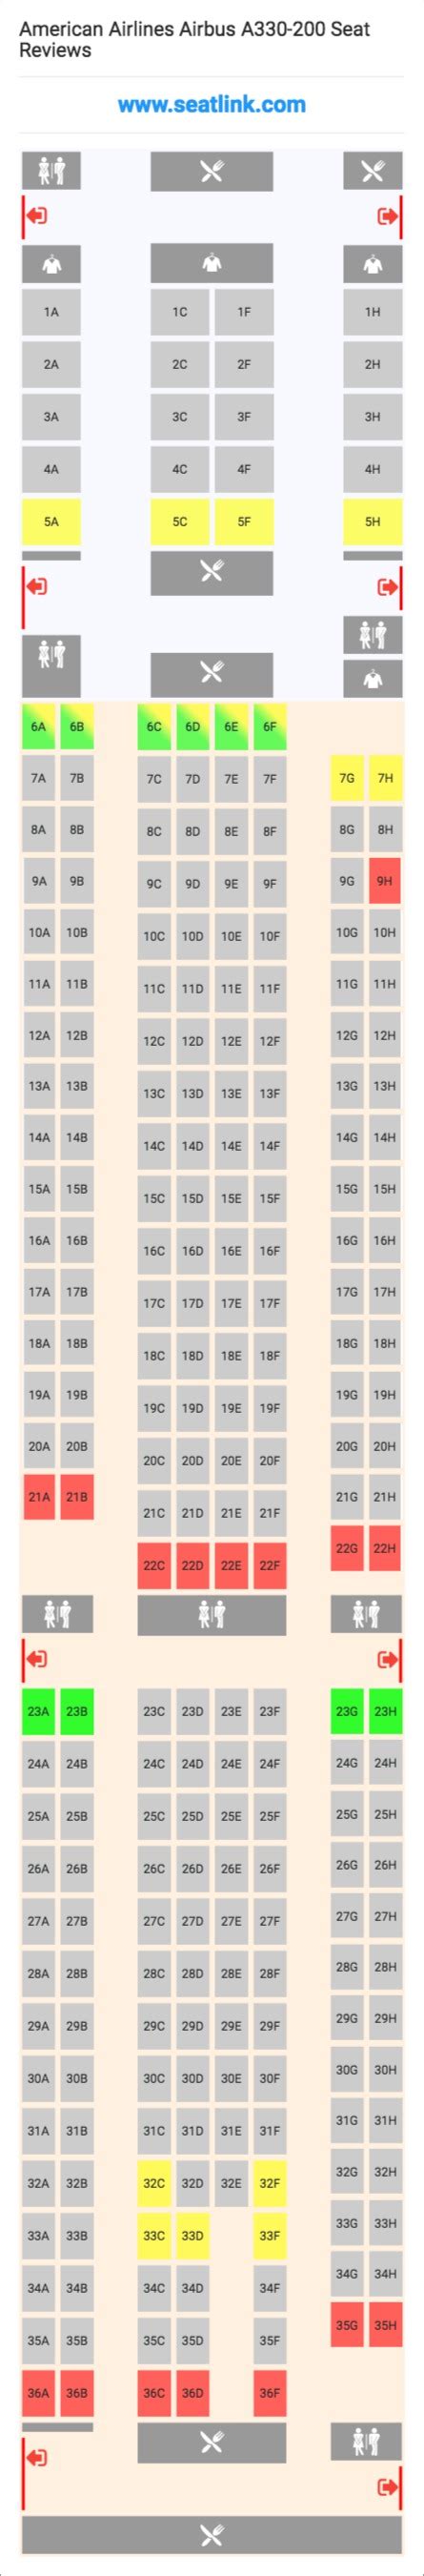 American Airlines Seat Selection Chart